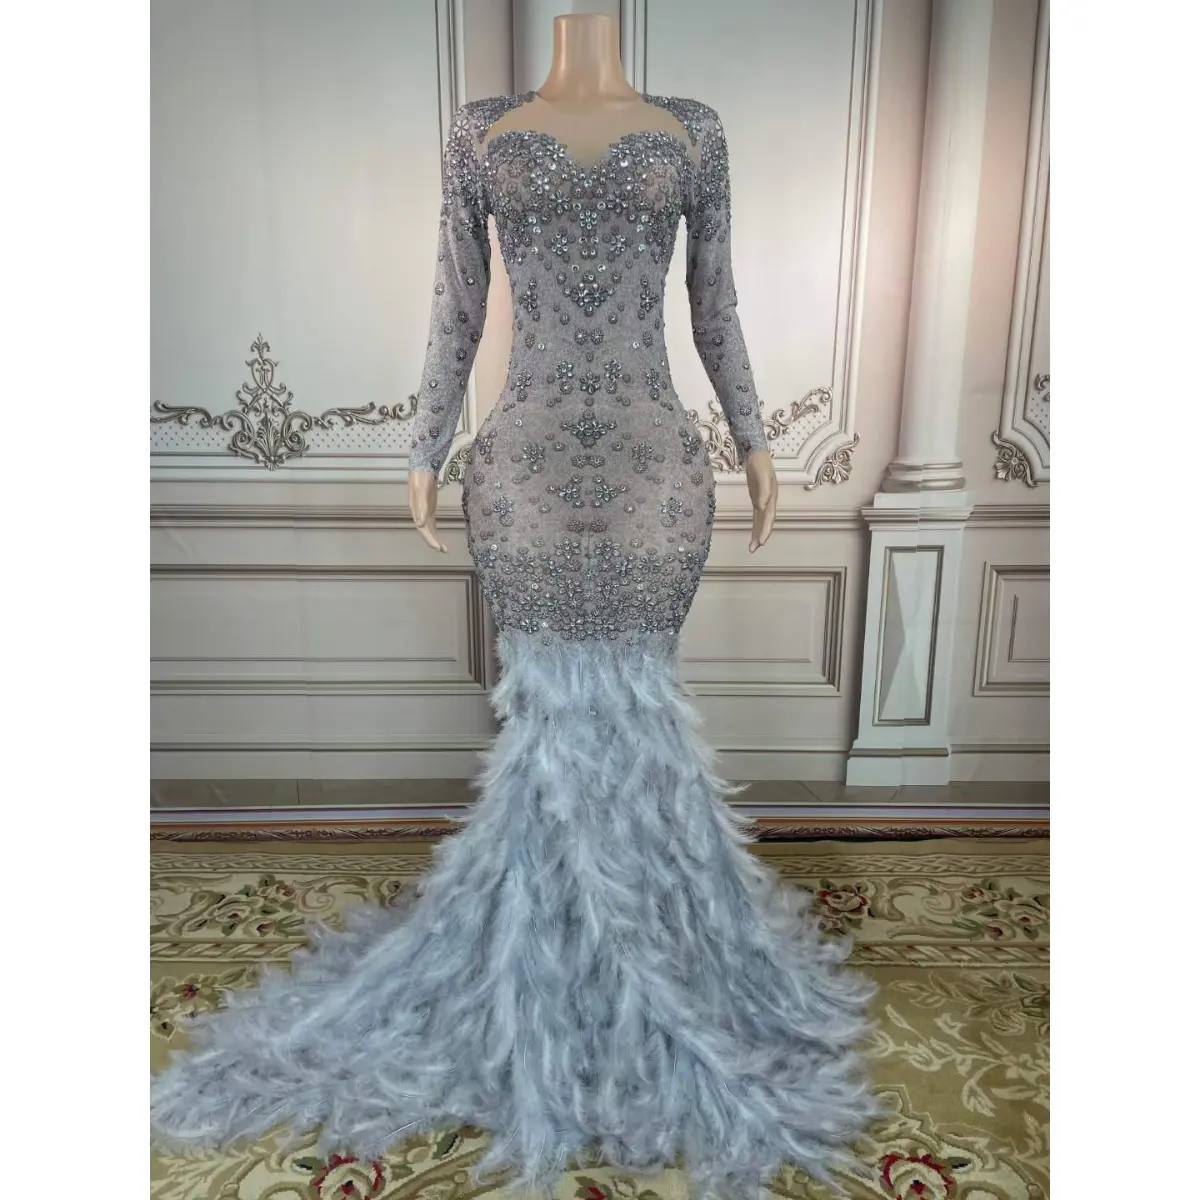 Ladies Long Sleeve Prom Gowns Evening Dresses Party Elegant Diamond Crystal Backless Feather Performance Wear Dress Clothing